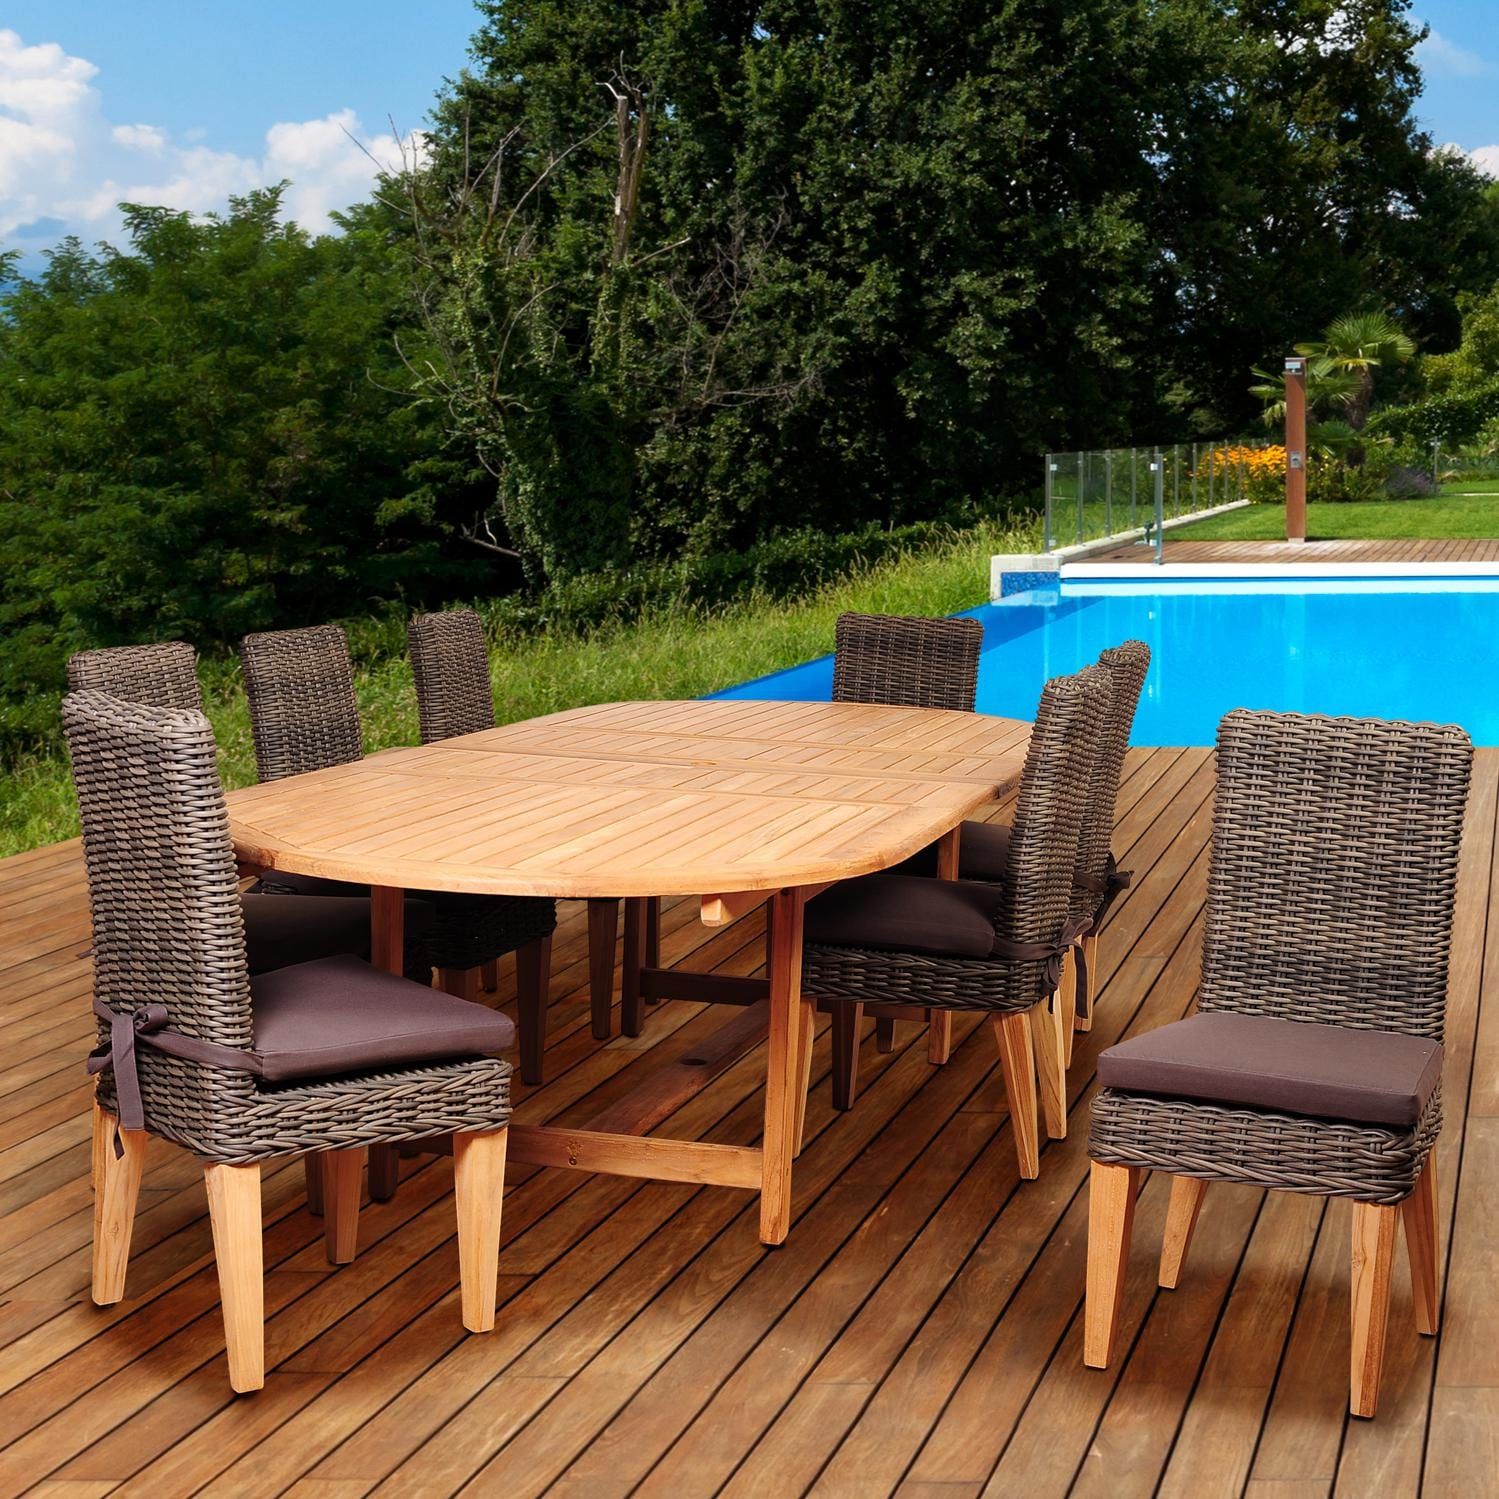 Singapore 9 Piece Resin Wicker Patio Dining Set With 87 X 47 Inch Oval Within 9 Piece Extendable Patio Dining Sets (View 2 of 15)